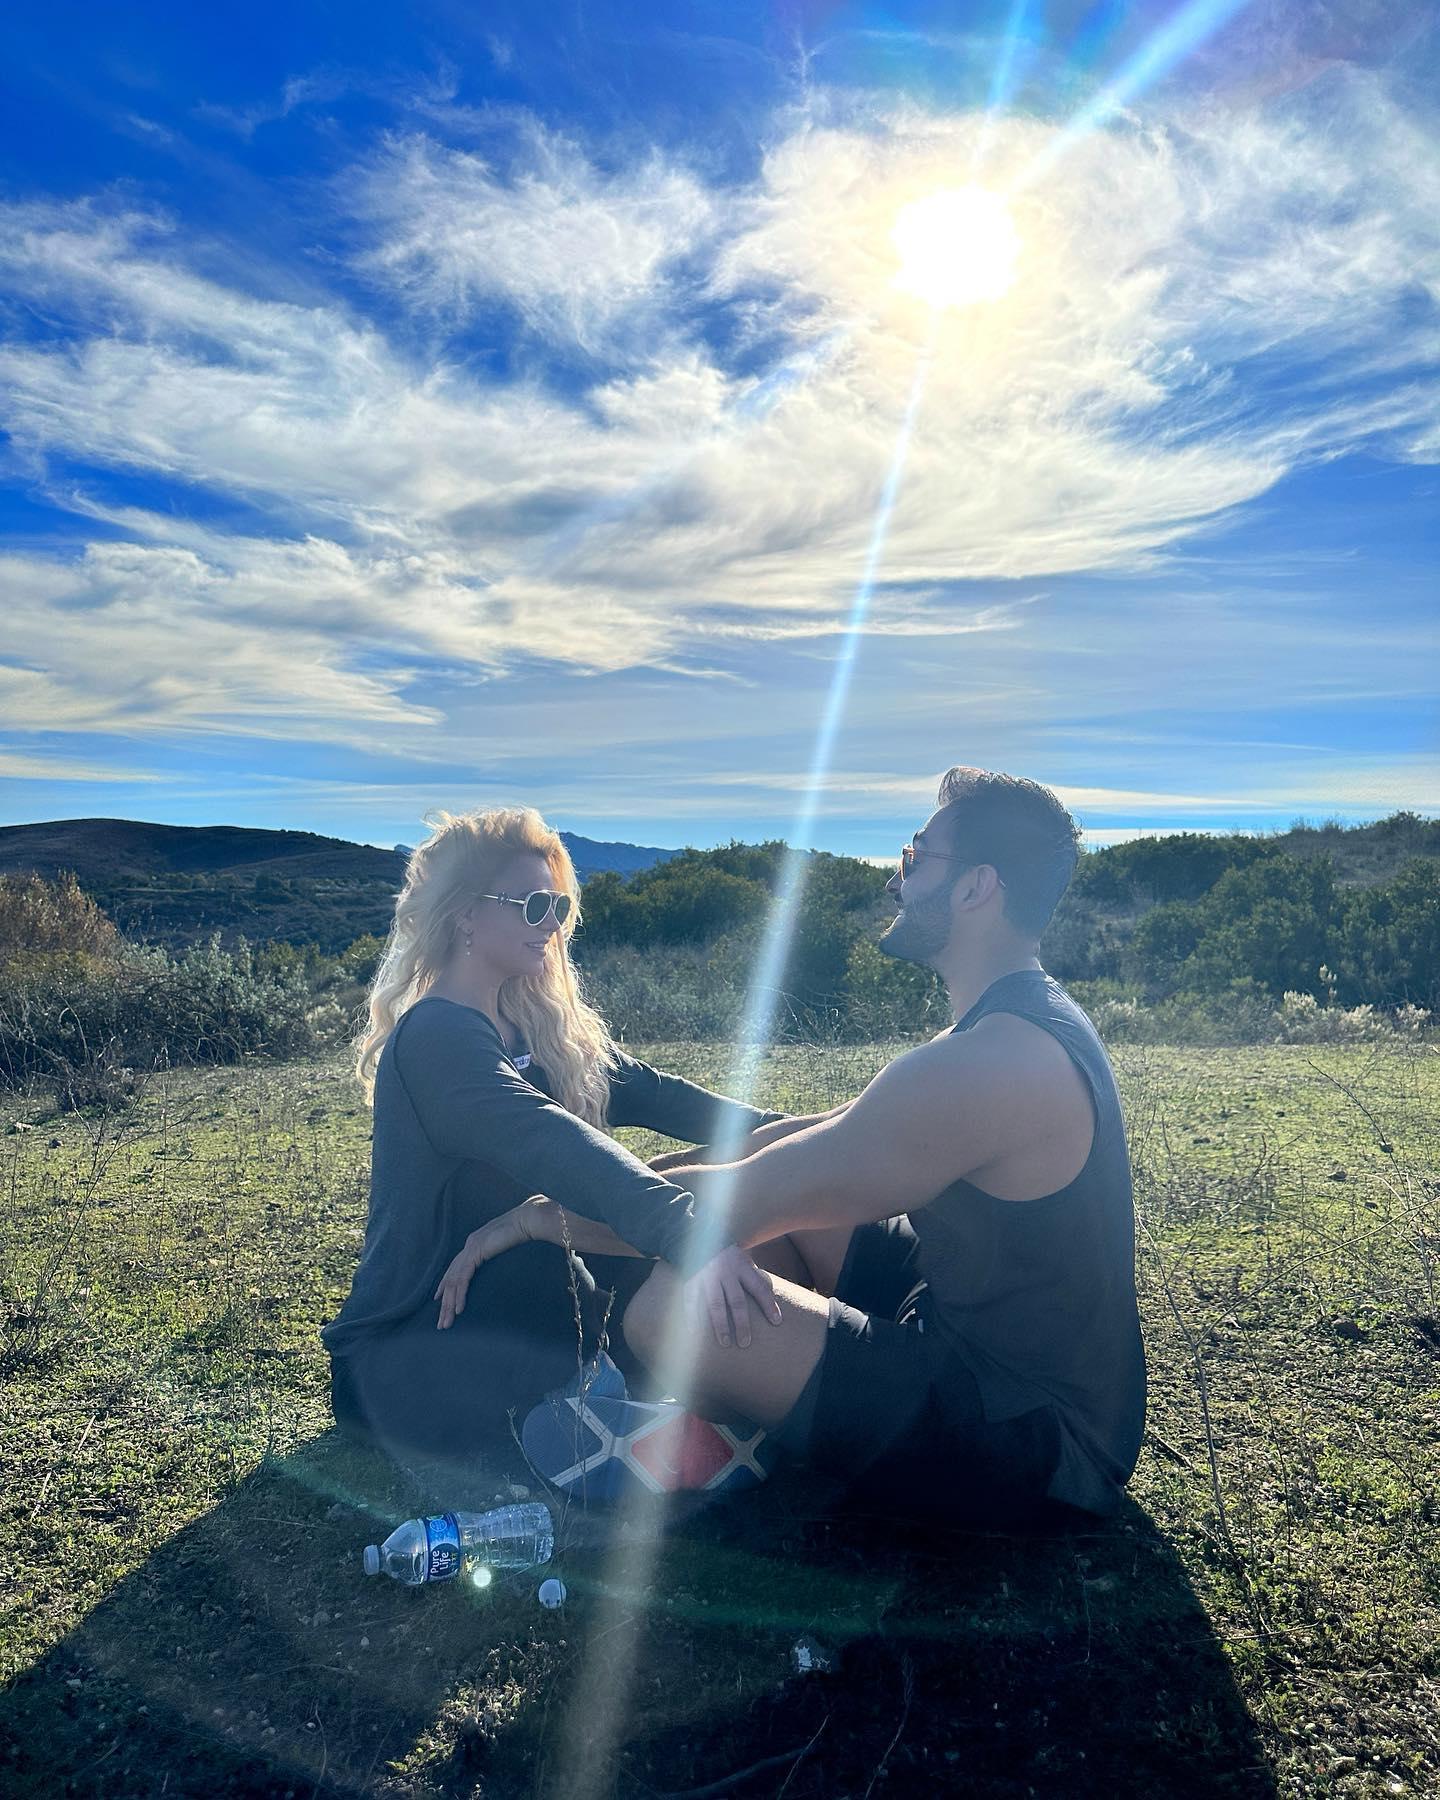 Sam Asghari and his wife celebrate Christmas 2022 with hiking and meditation